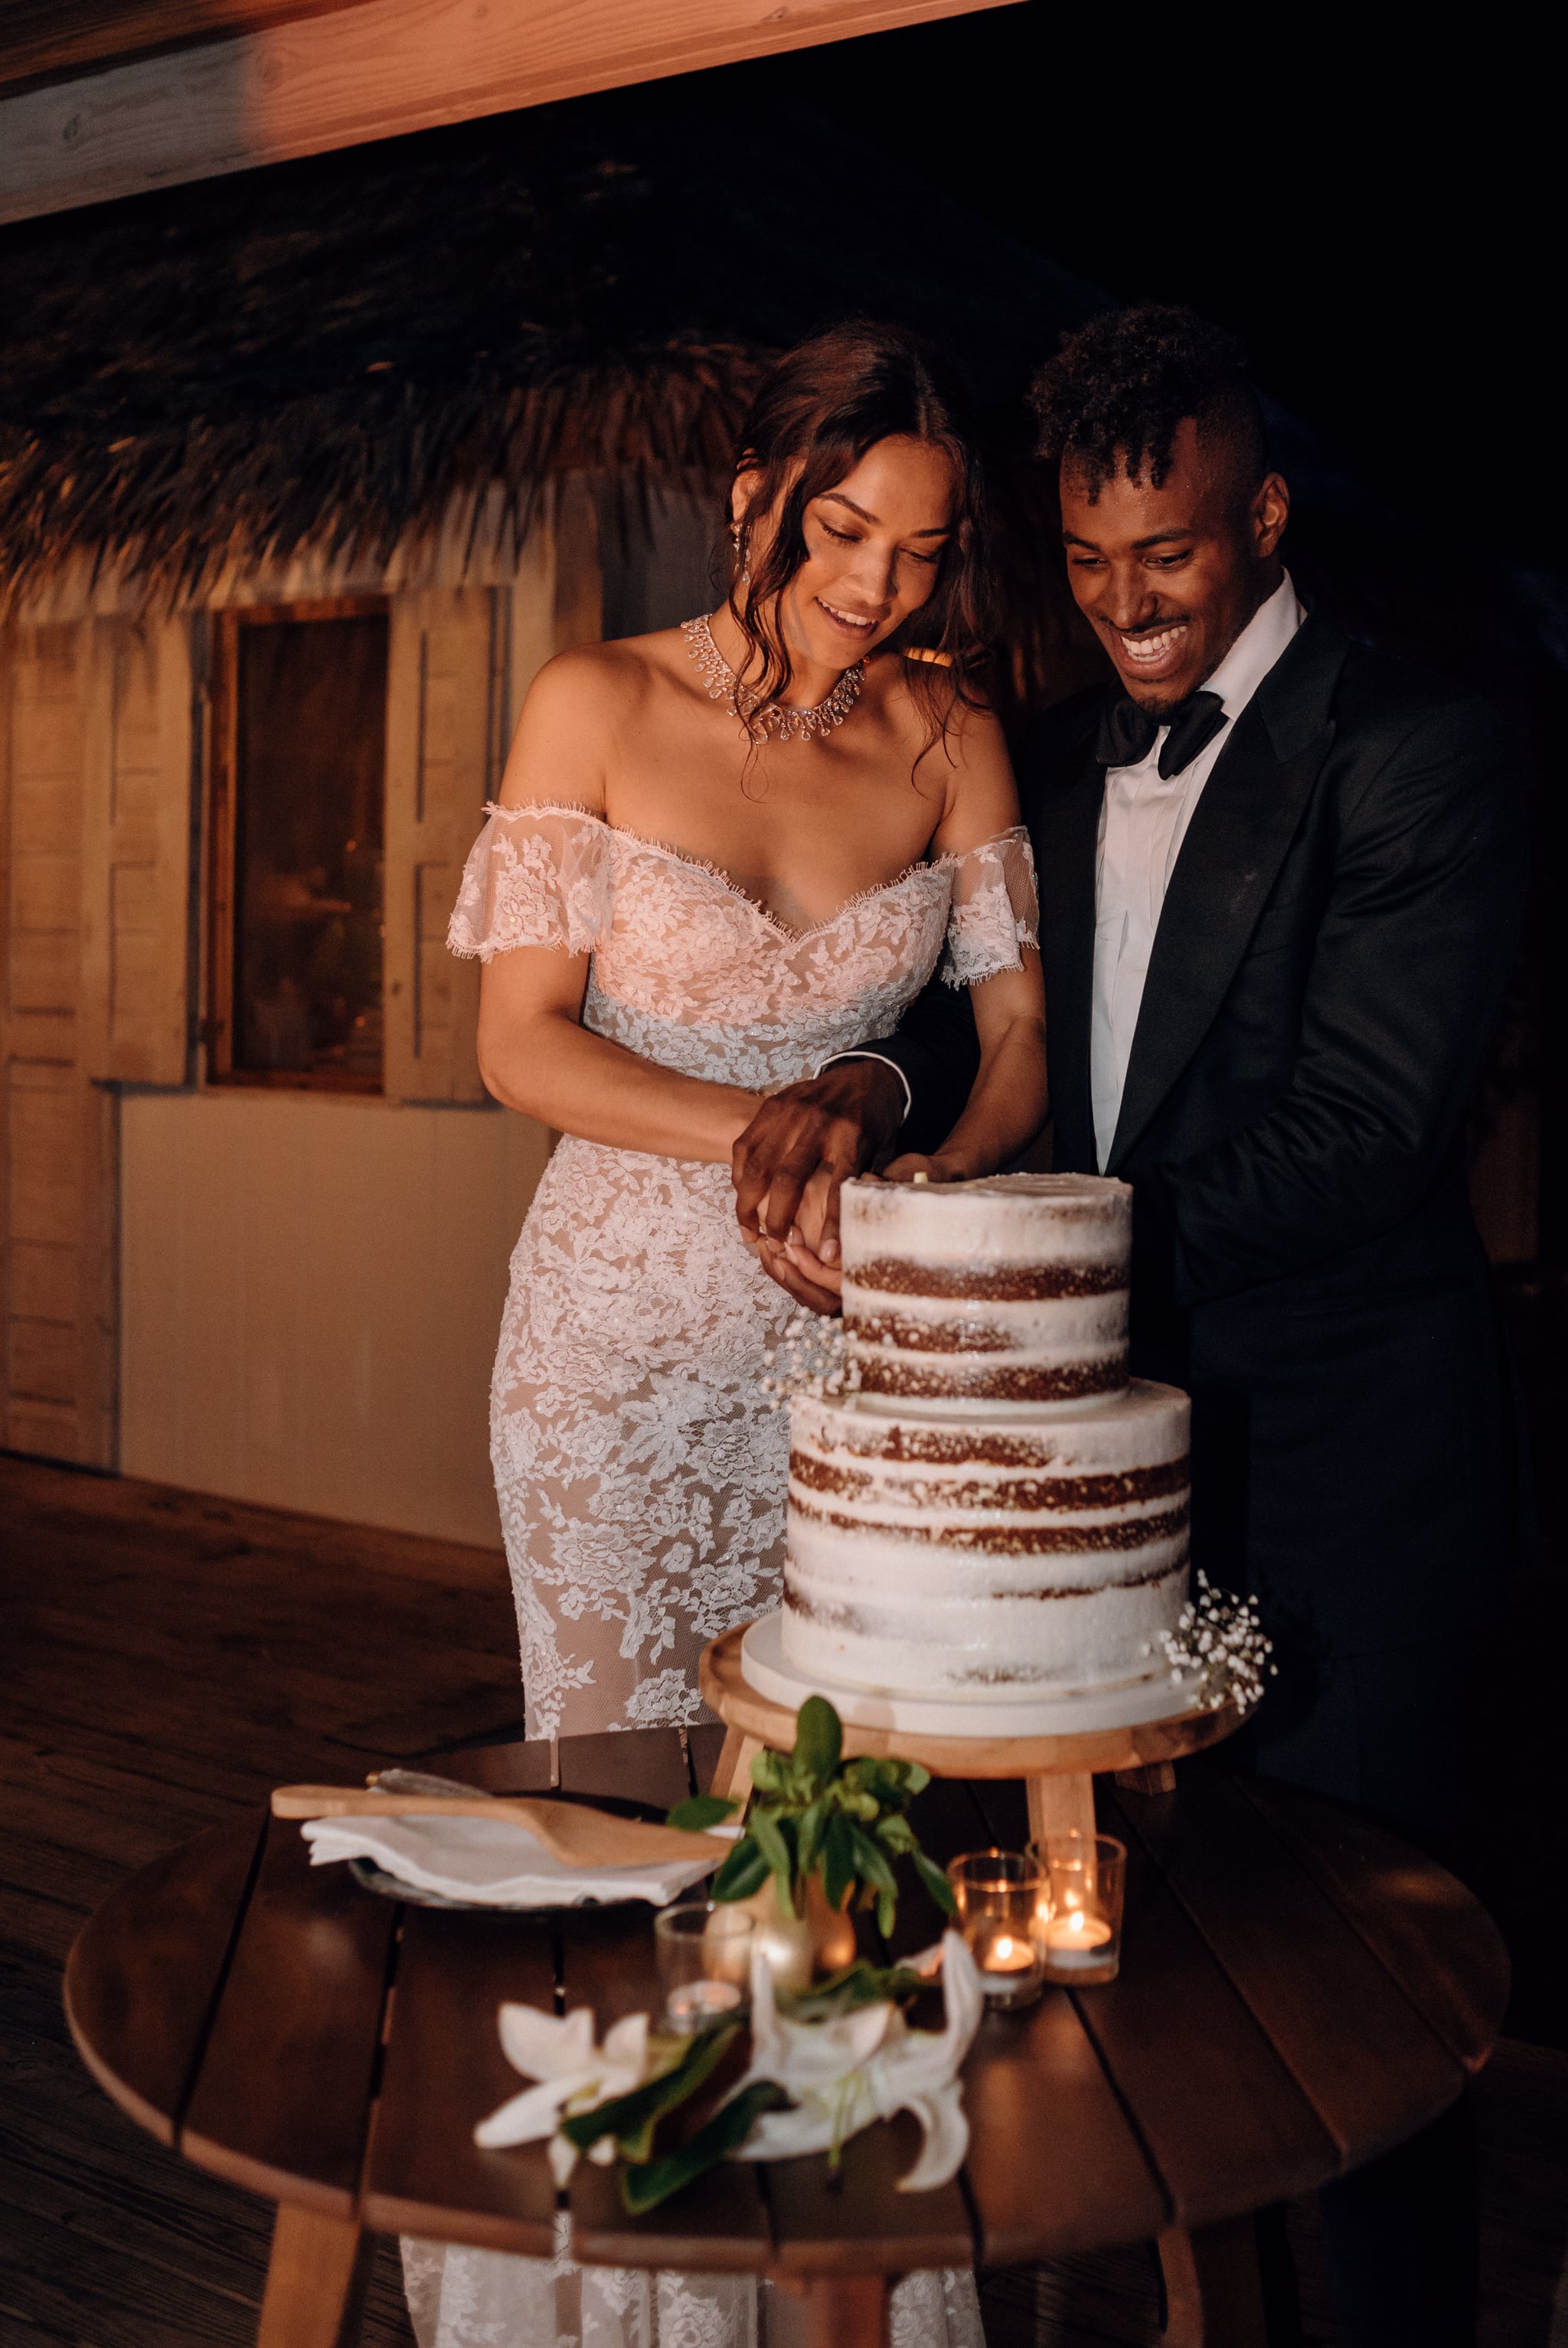 The Groom Wore a Ford Tuxedo | This Bride's Supersheer Wedding Dress Is What Dreams Are Made Of | POPSUGAR Fashion Photo 16